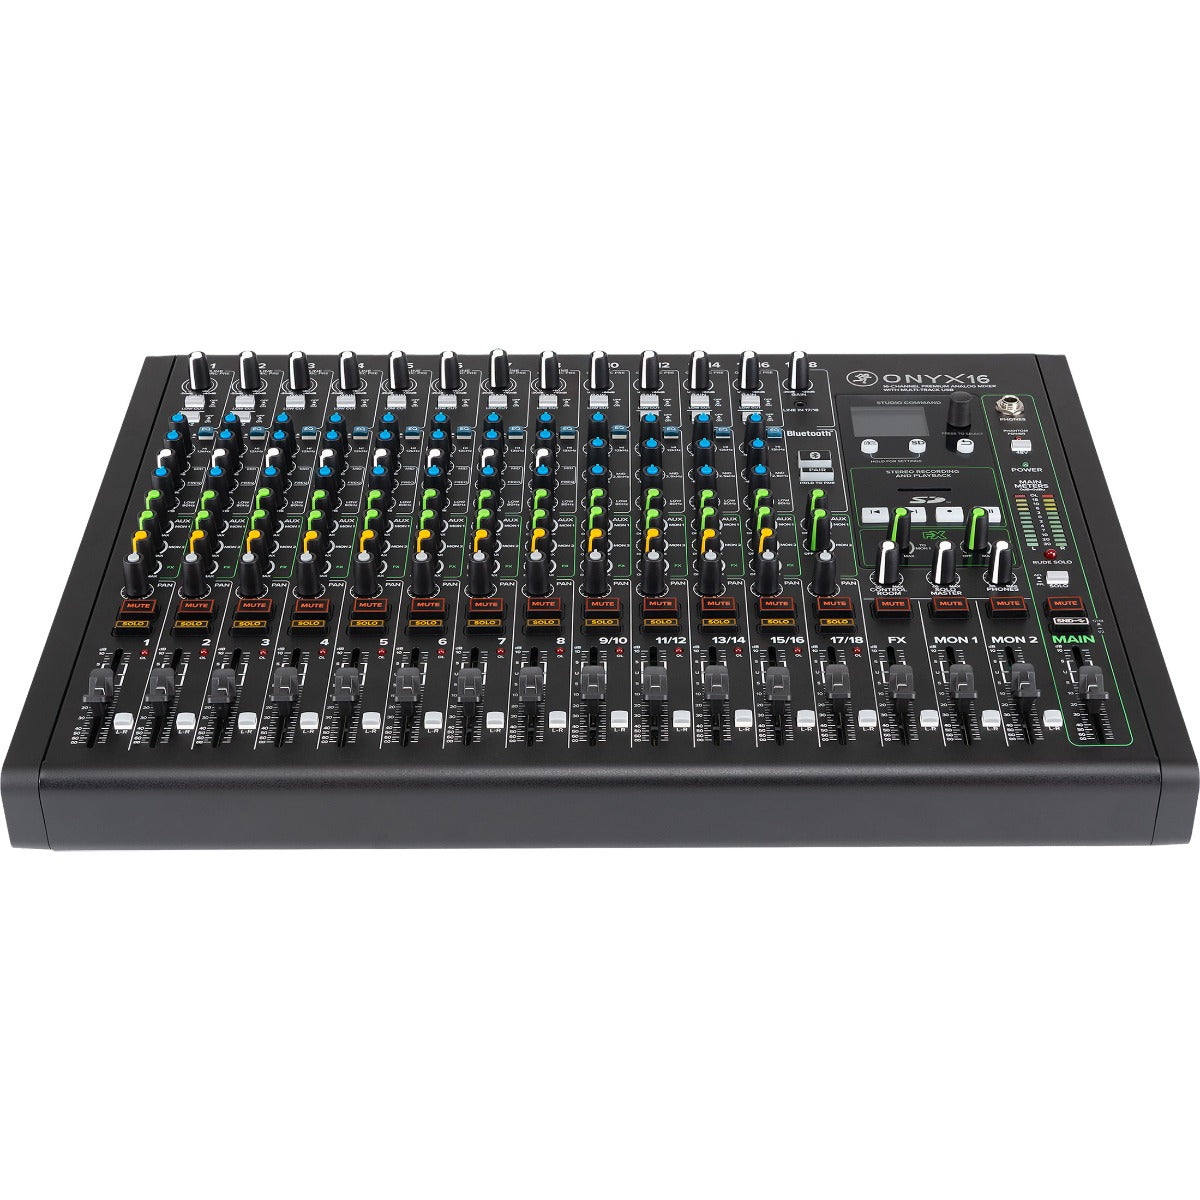 Perspective view of Mackie Onyx16 16-Channel Analog Mixer w/Multitrack USB showing top and front